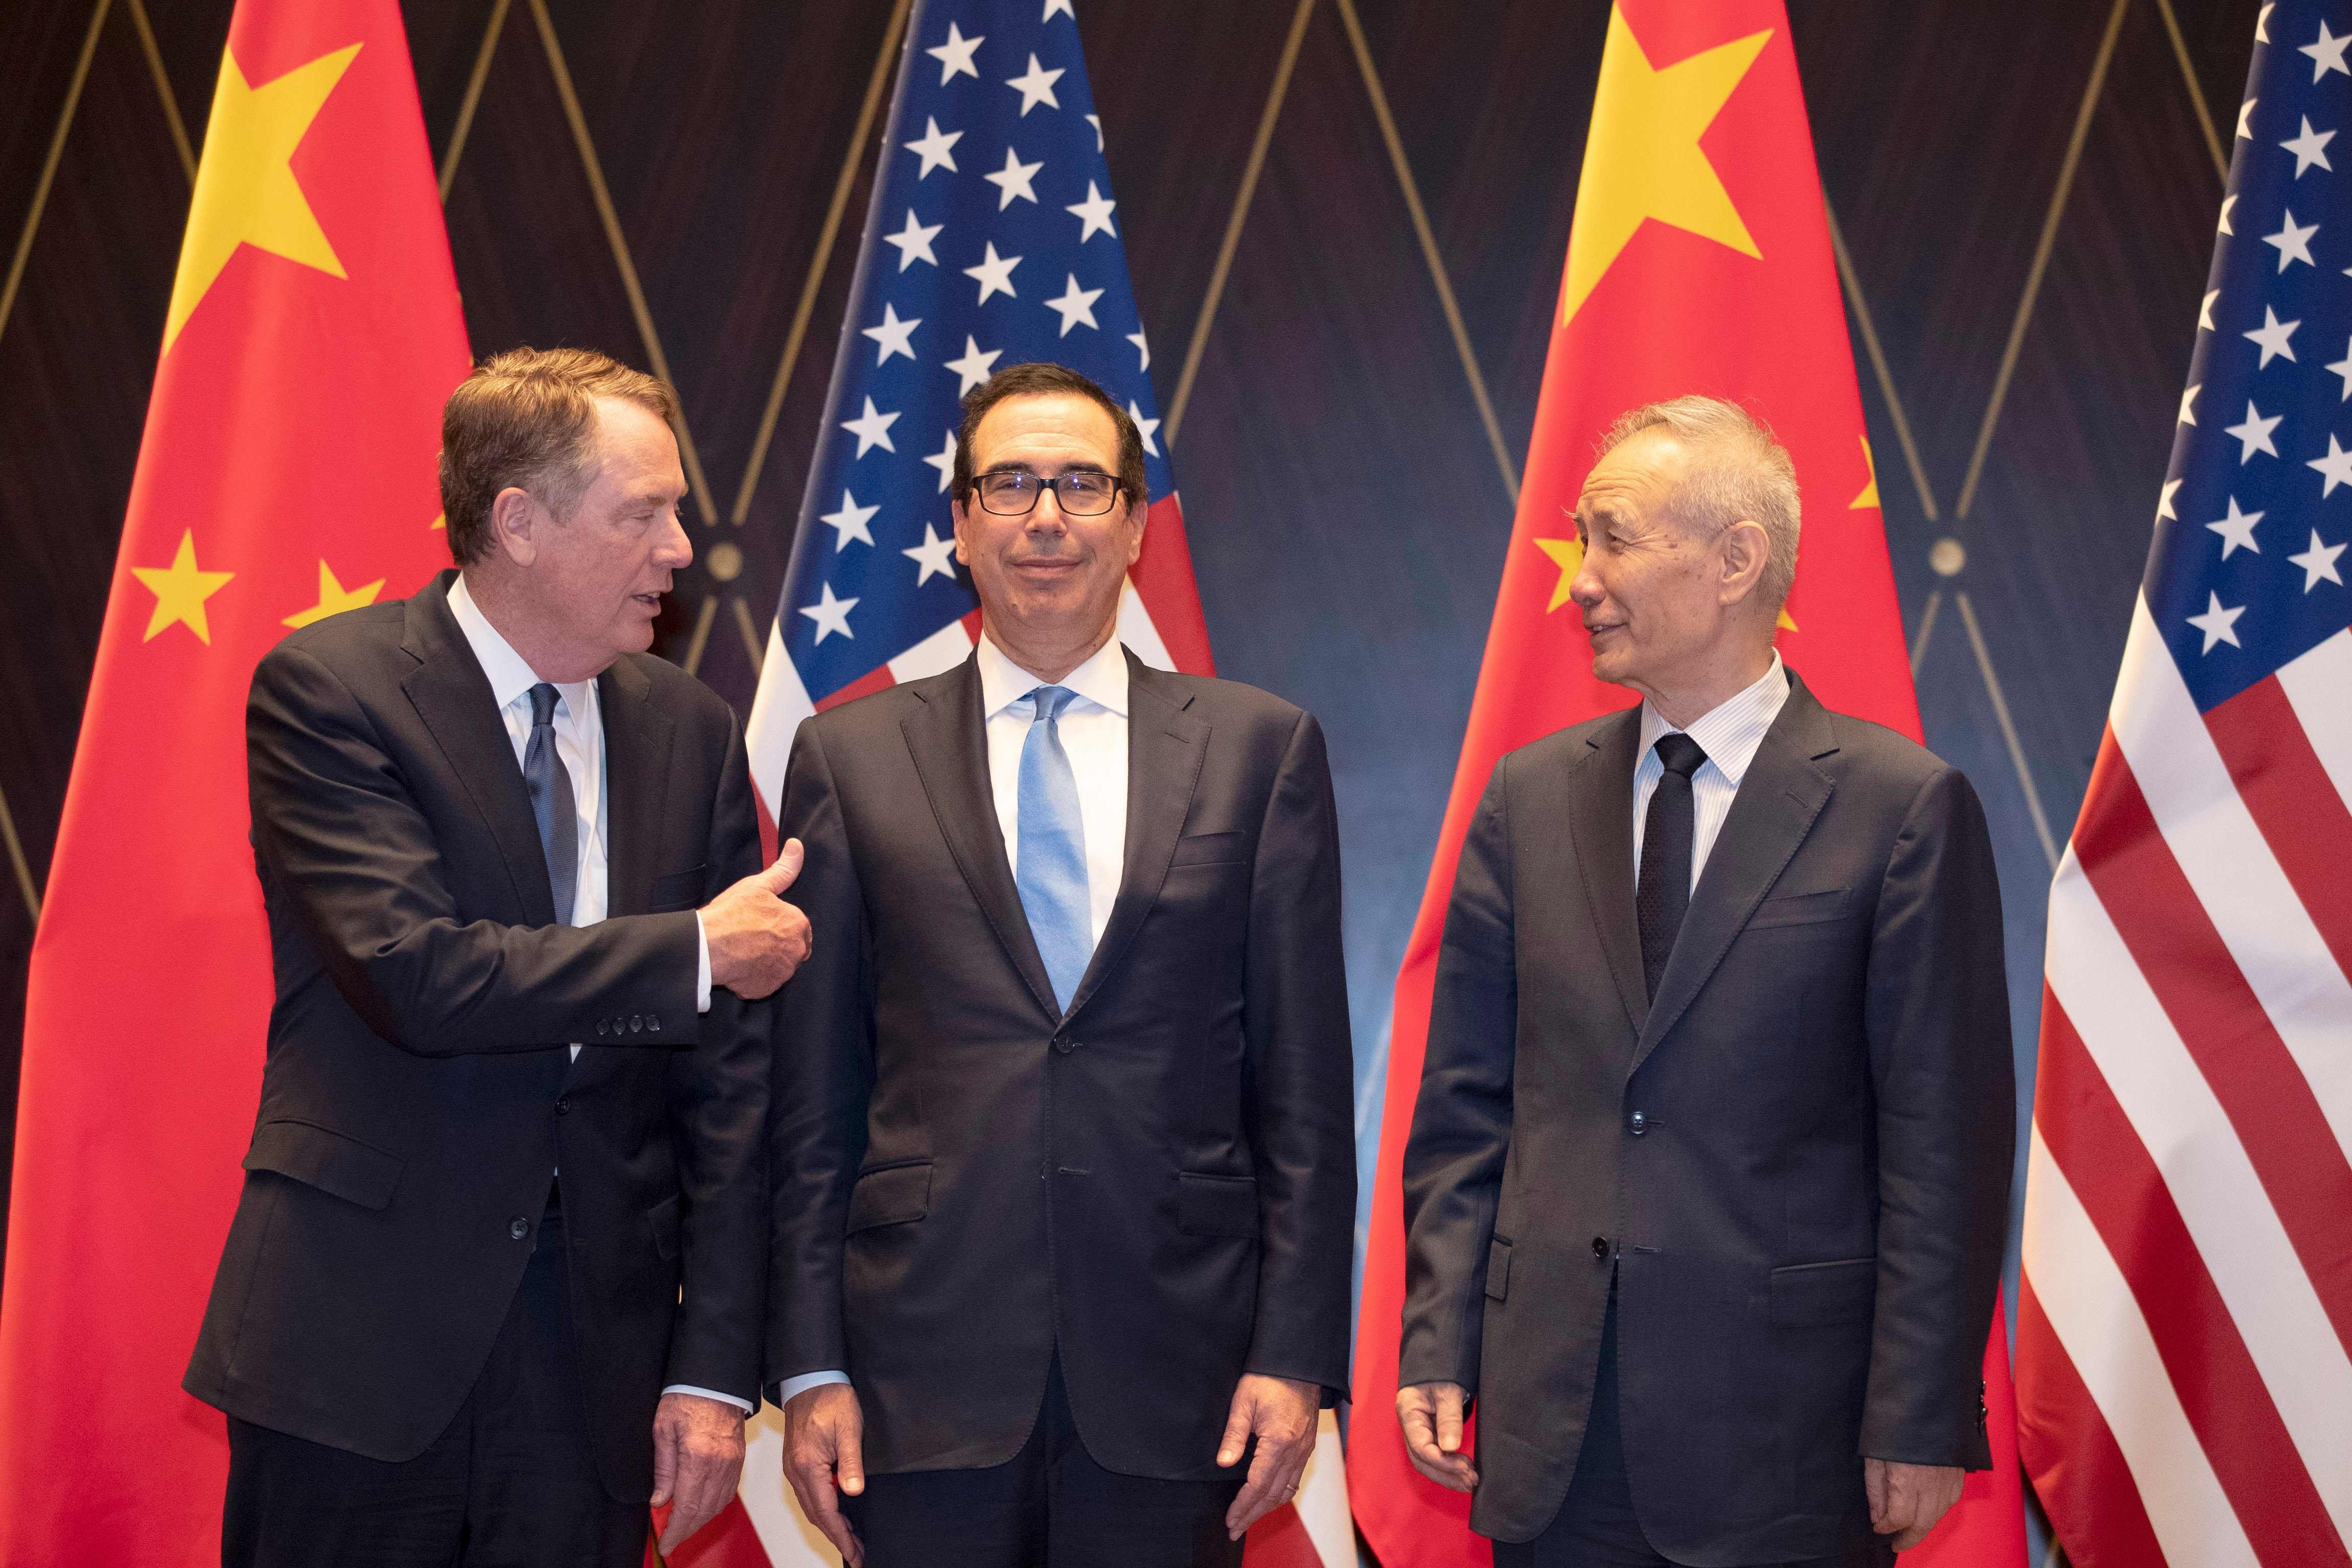 US Trade Representative Robert Lighthizer and US Treasury Secretary Steven Mnuchin pose for a photo with Chinese Vice-Premier Liu He in Shanghai on July 31. Within 48 hours of this picture, when progress in negotiations was apparent, the trade war between the US and China escalated with the announcement of fresh tariffs. Photo: AFP